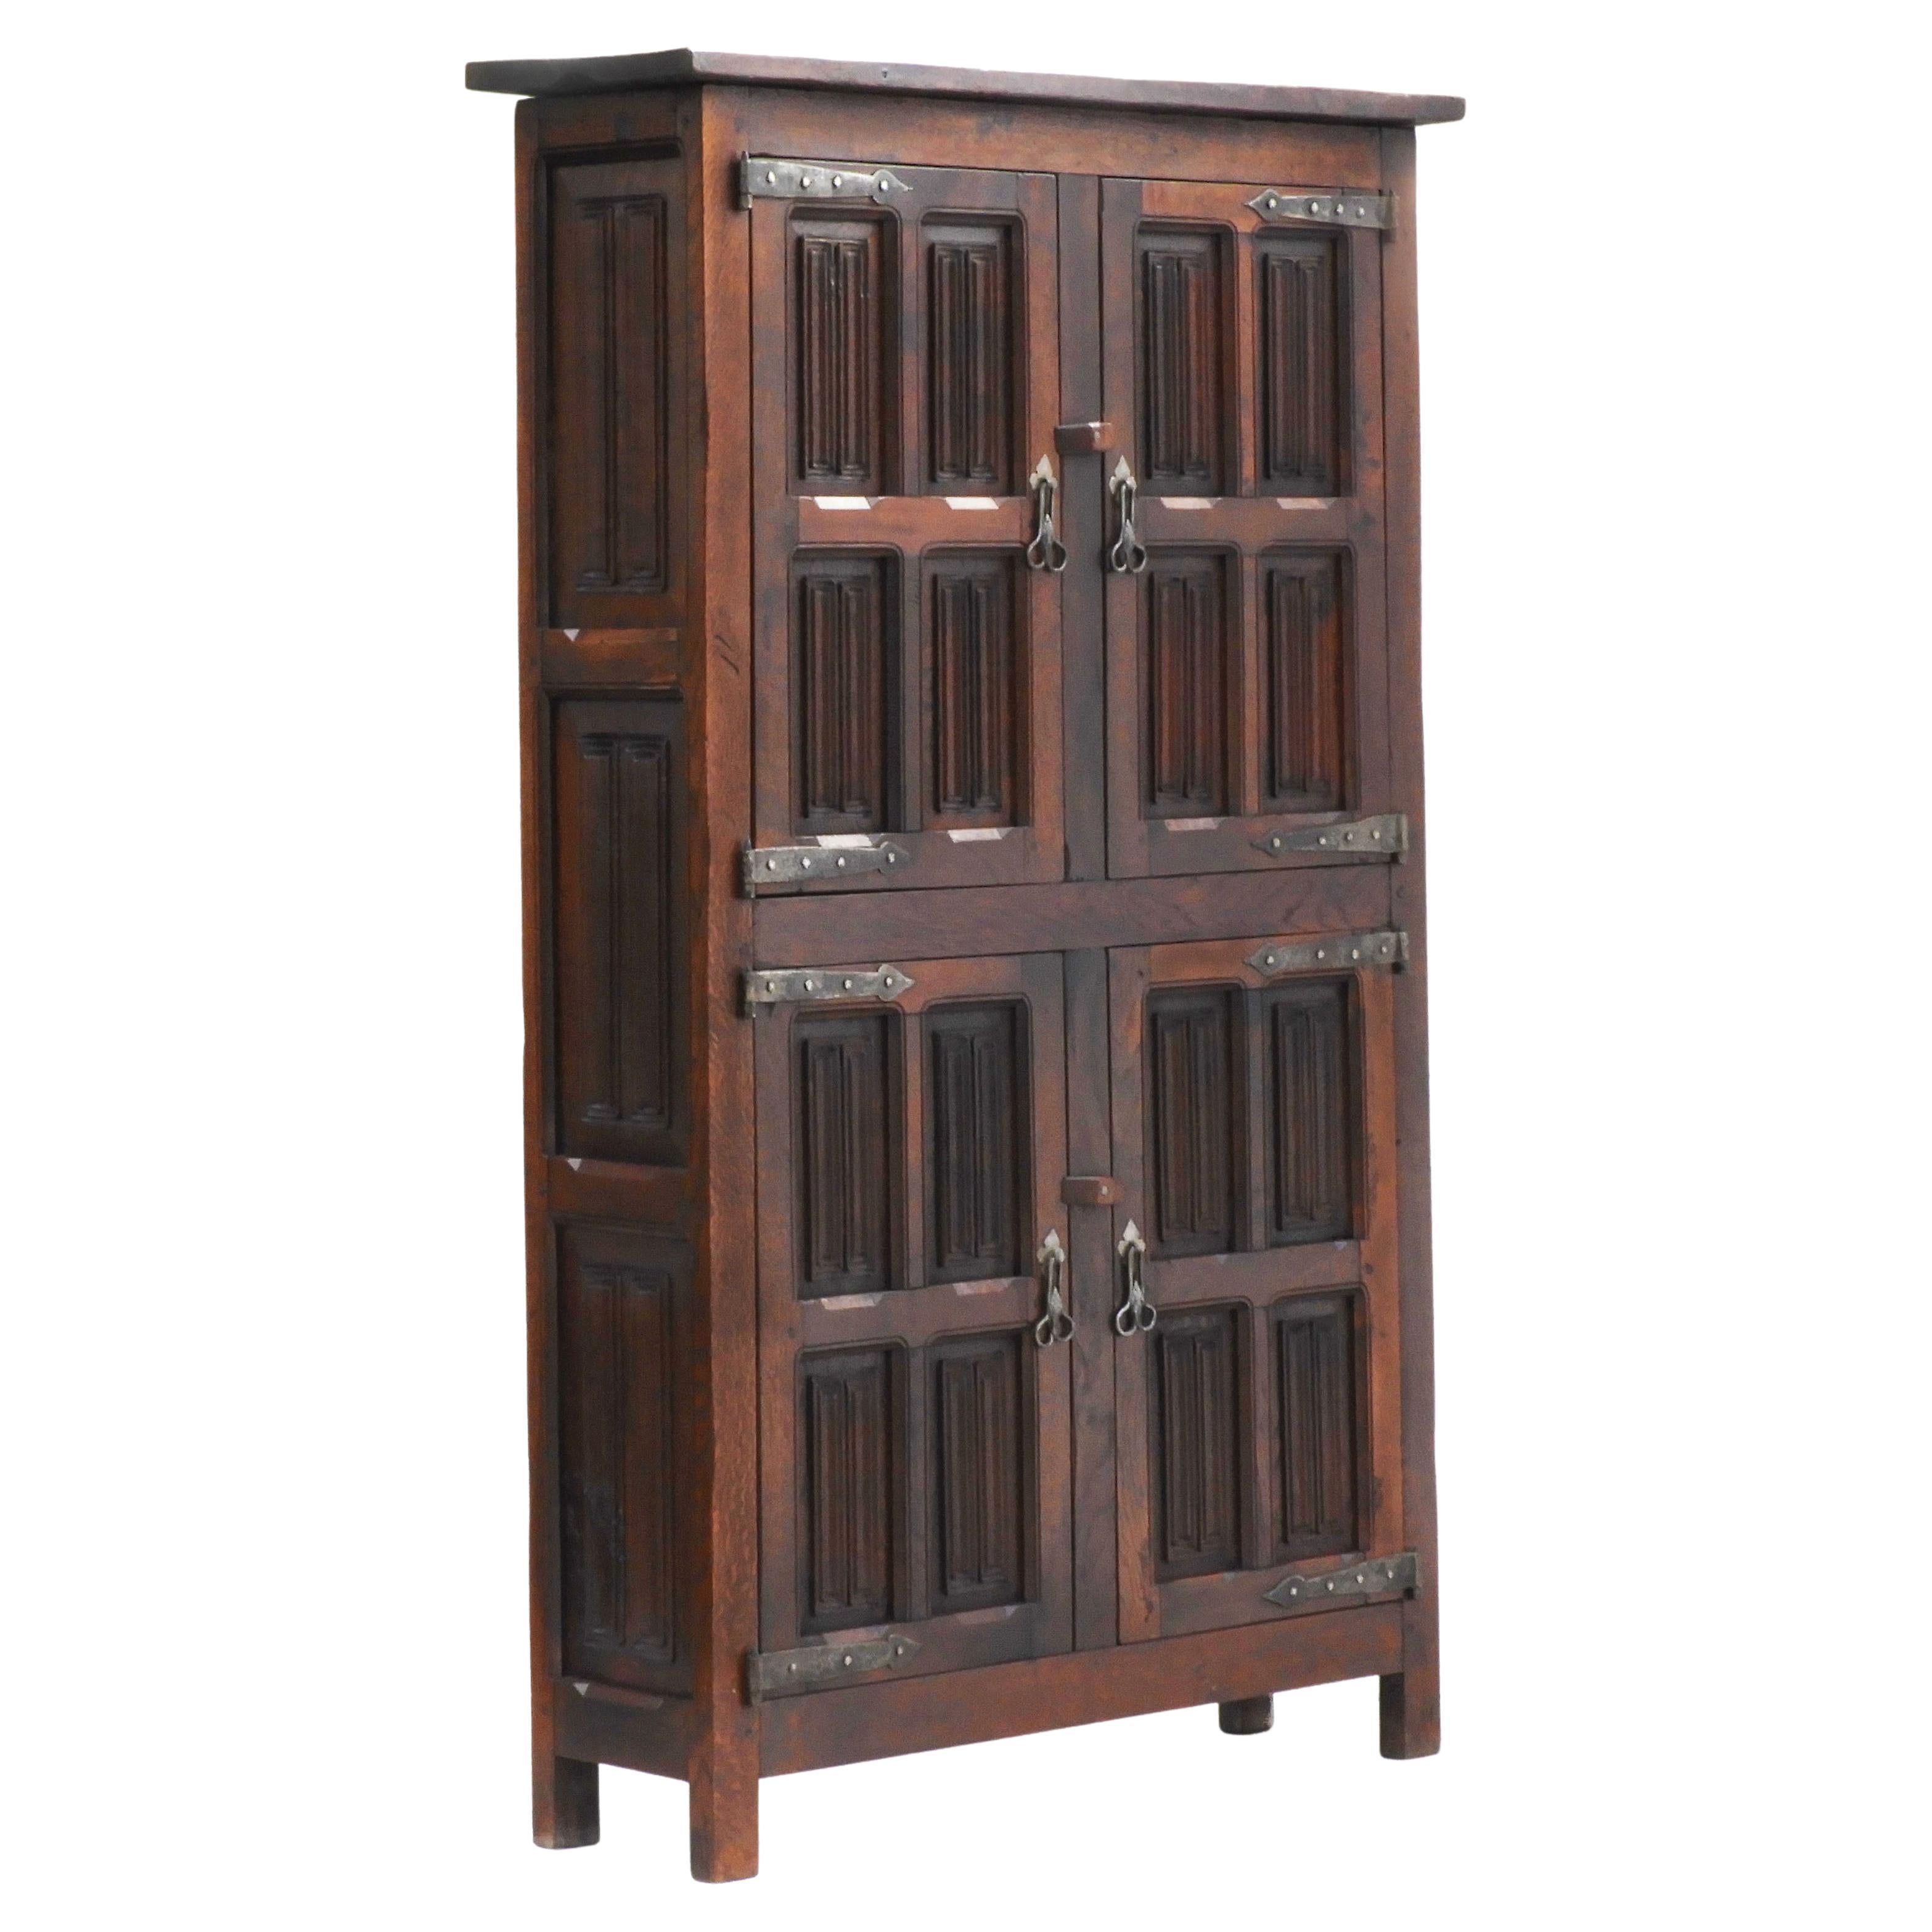 Beautiful English Arts & Crafts cupboard c1900.

A single-piece, four-door, two cupboard, linen press with wonderfully carved oak panels in Tudor revival linenfold design and finished with charming hand-forged ironmongery furnishings. A generously